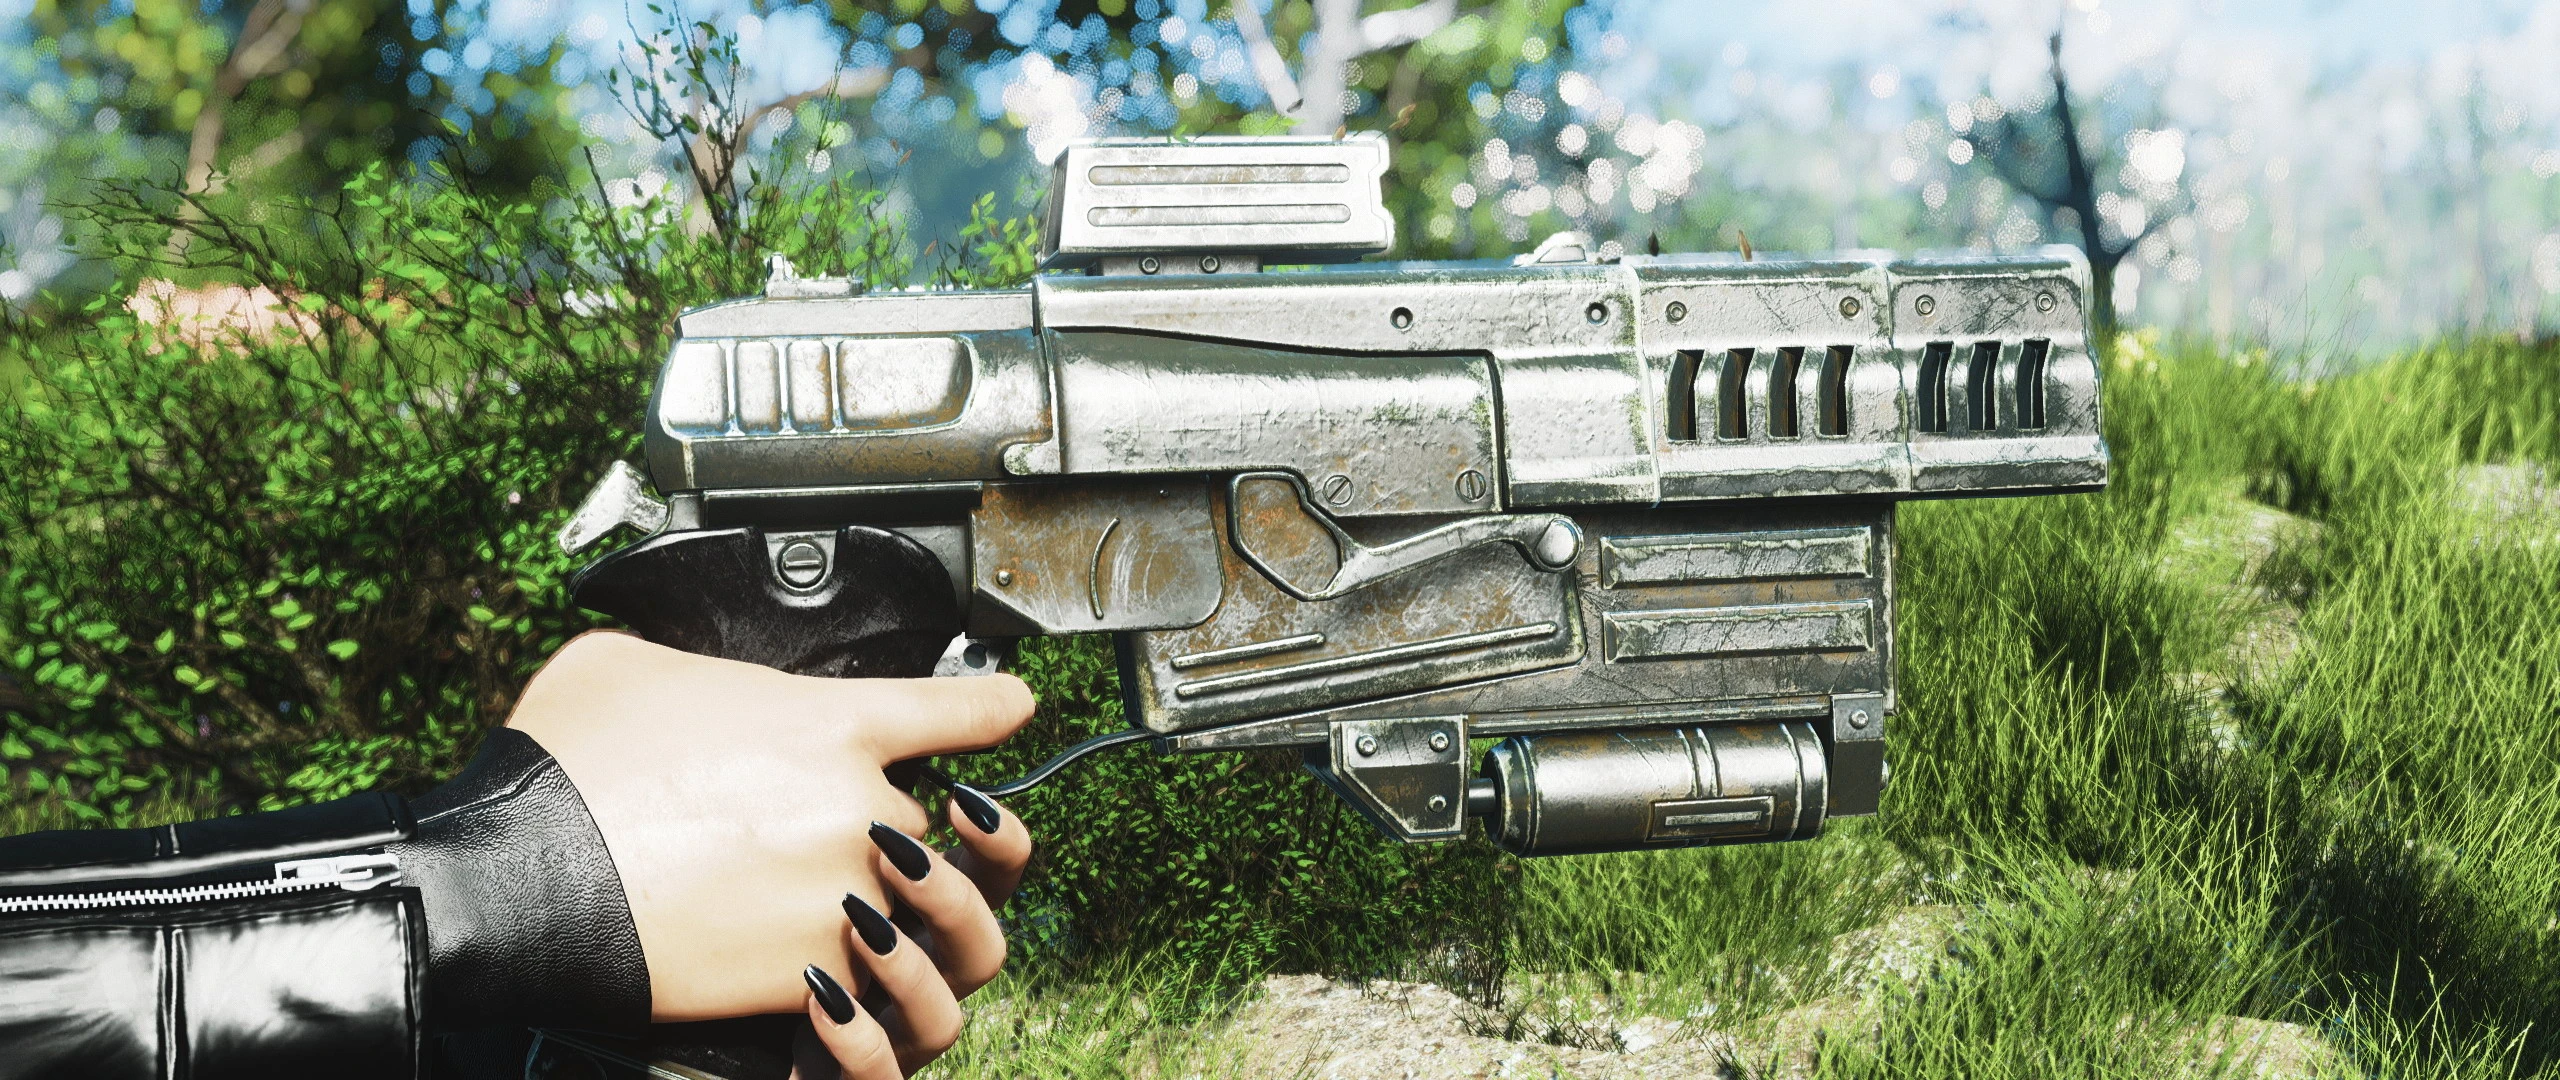 10mm pistol reanimation pack fallout 4 фото 42